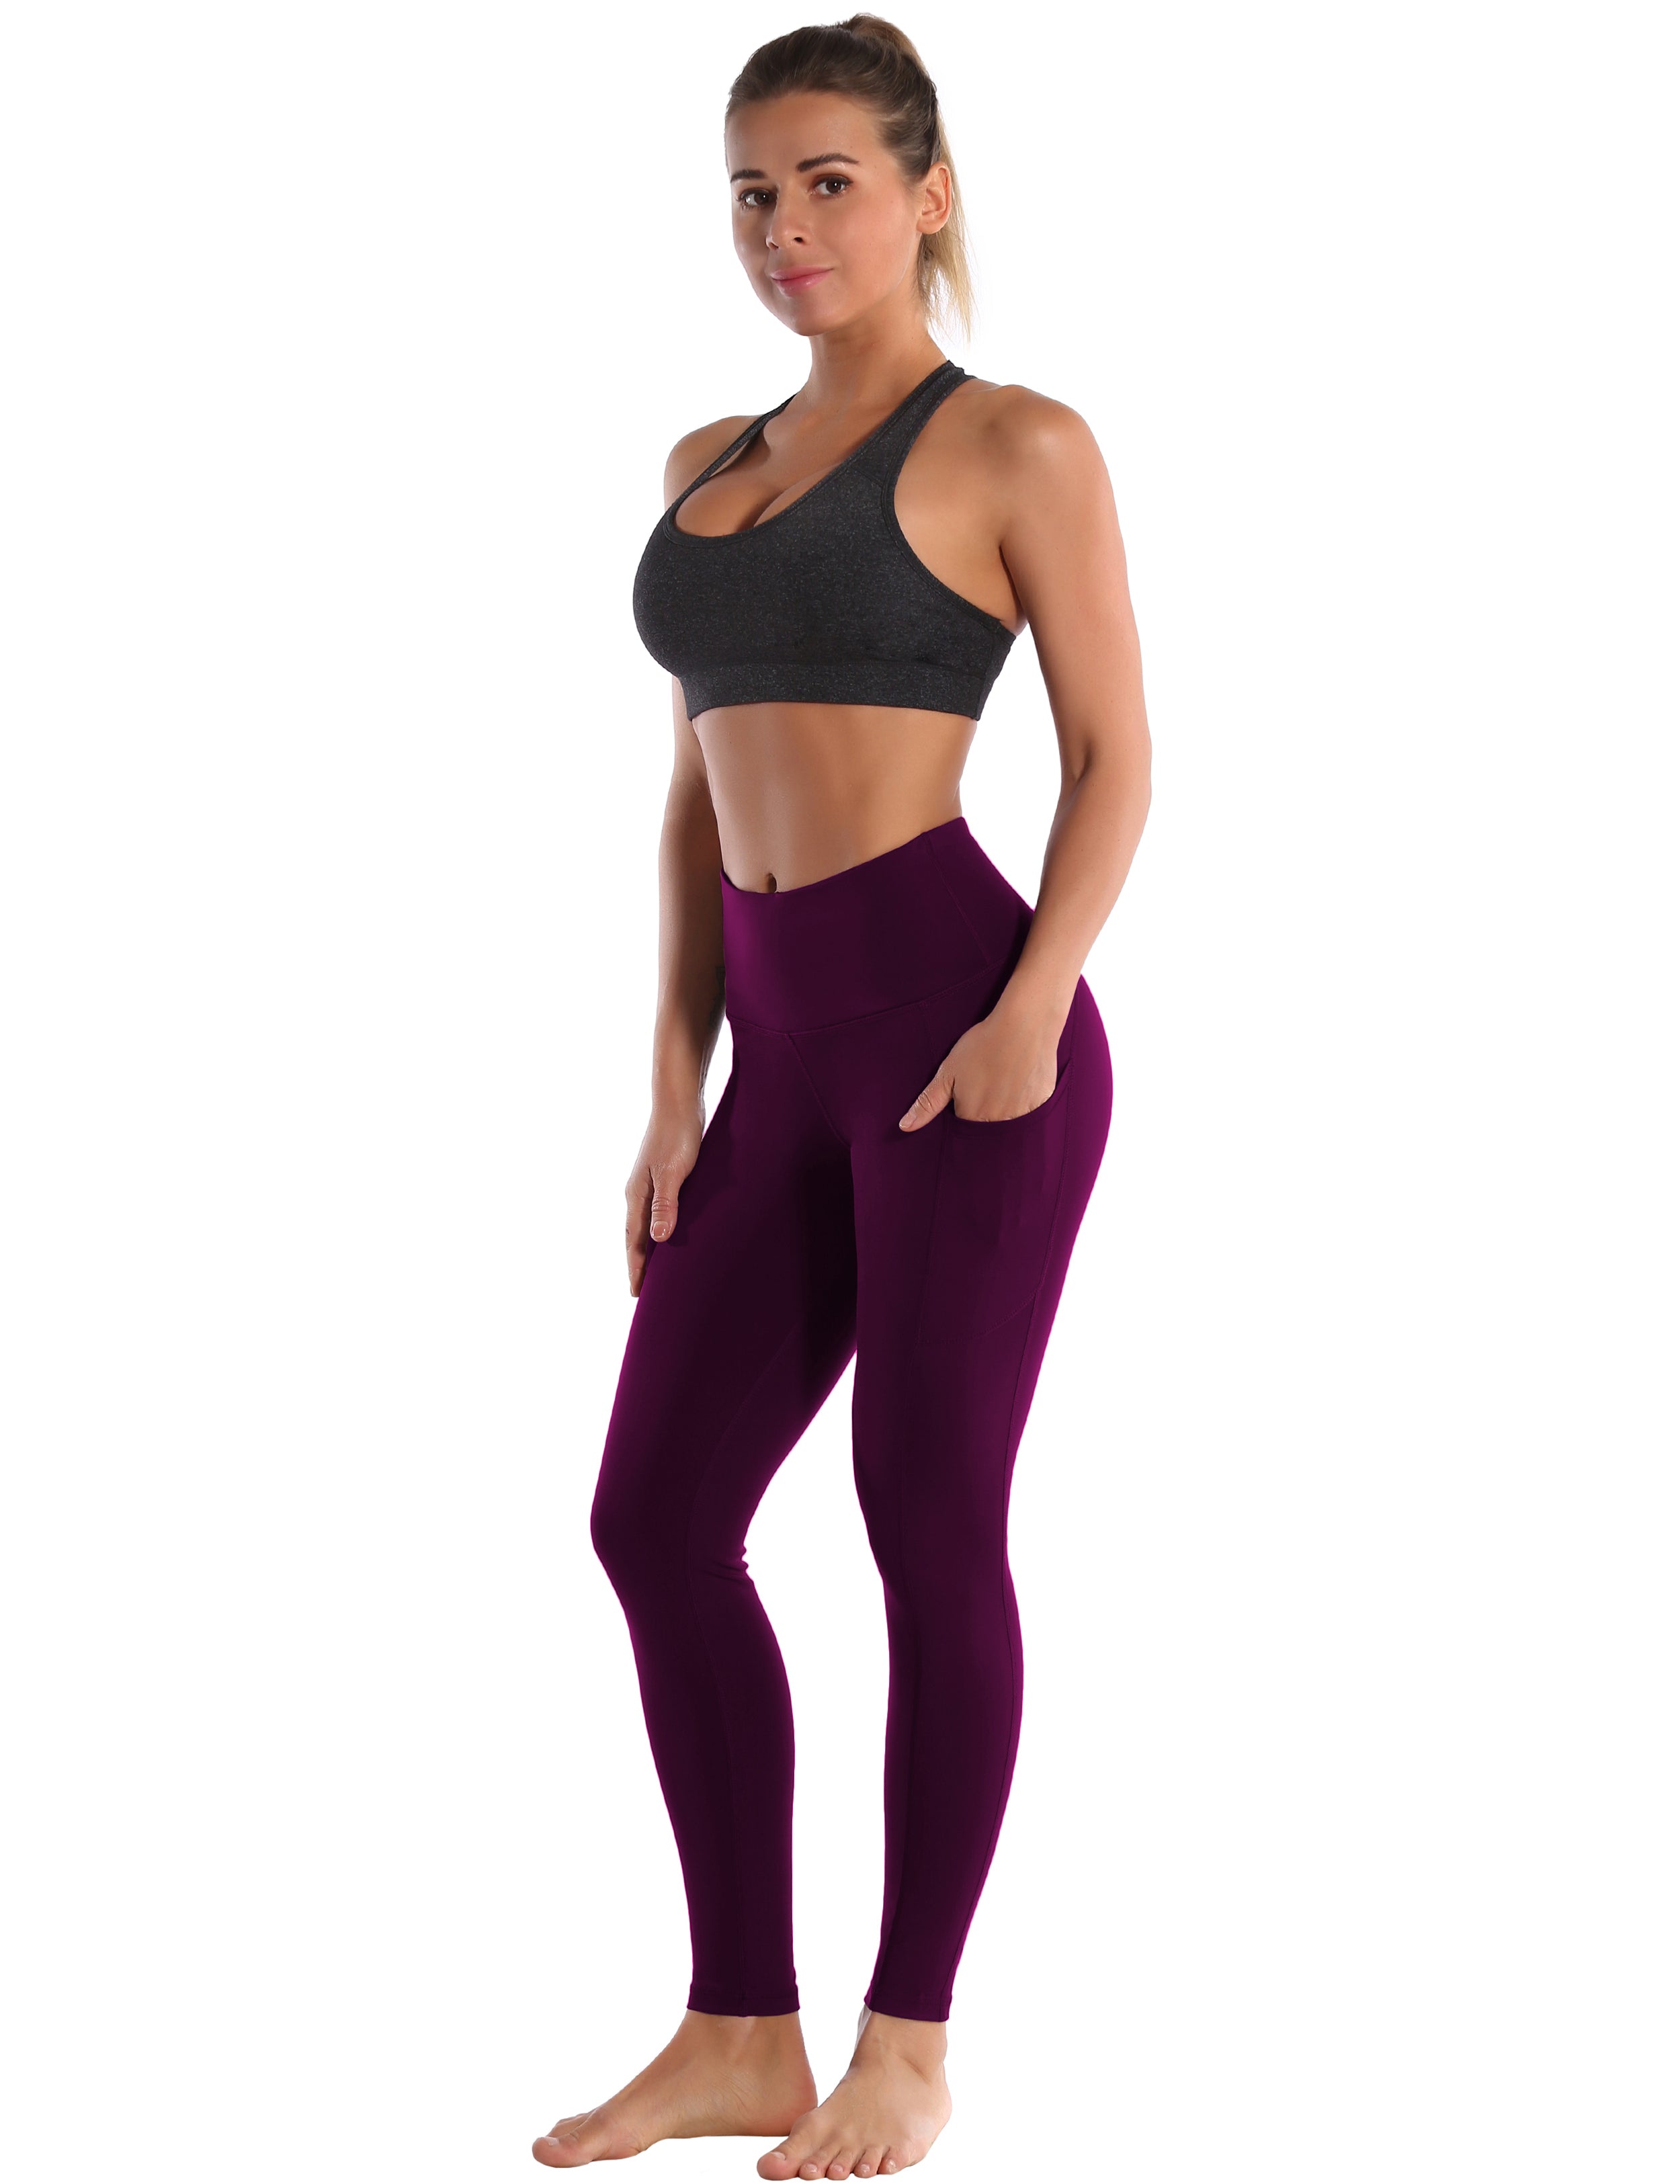 Hip Line Side Pockets Gym Pants plum Sexy Hip Line Side Pockets 75%Nylon/25%Spandex Fabric doesn't attract lint easily 4-way stretch No see-through Moisture-wicking Tummy control Inner pocket Two lengths